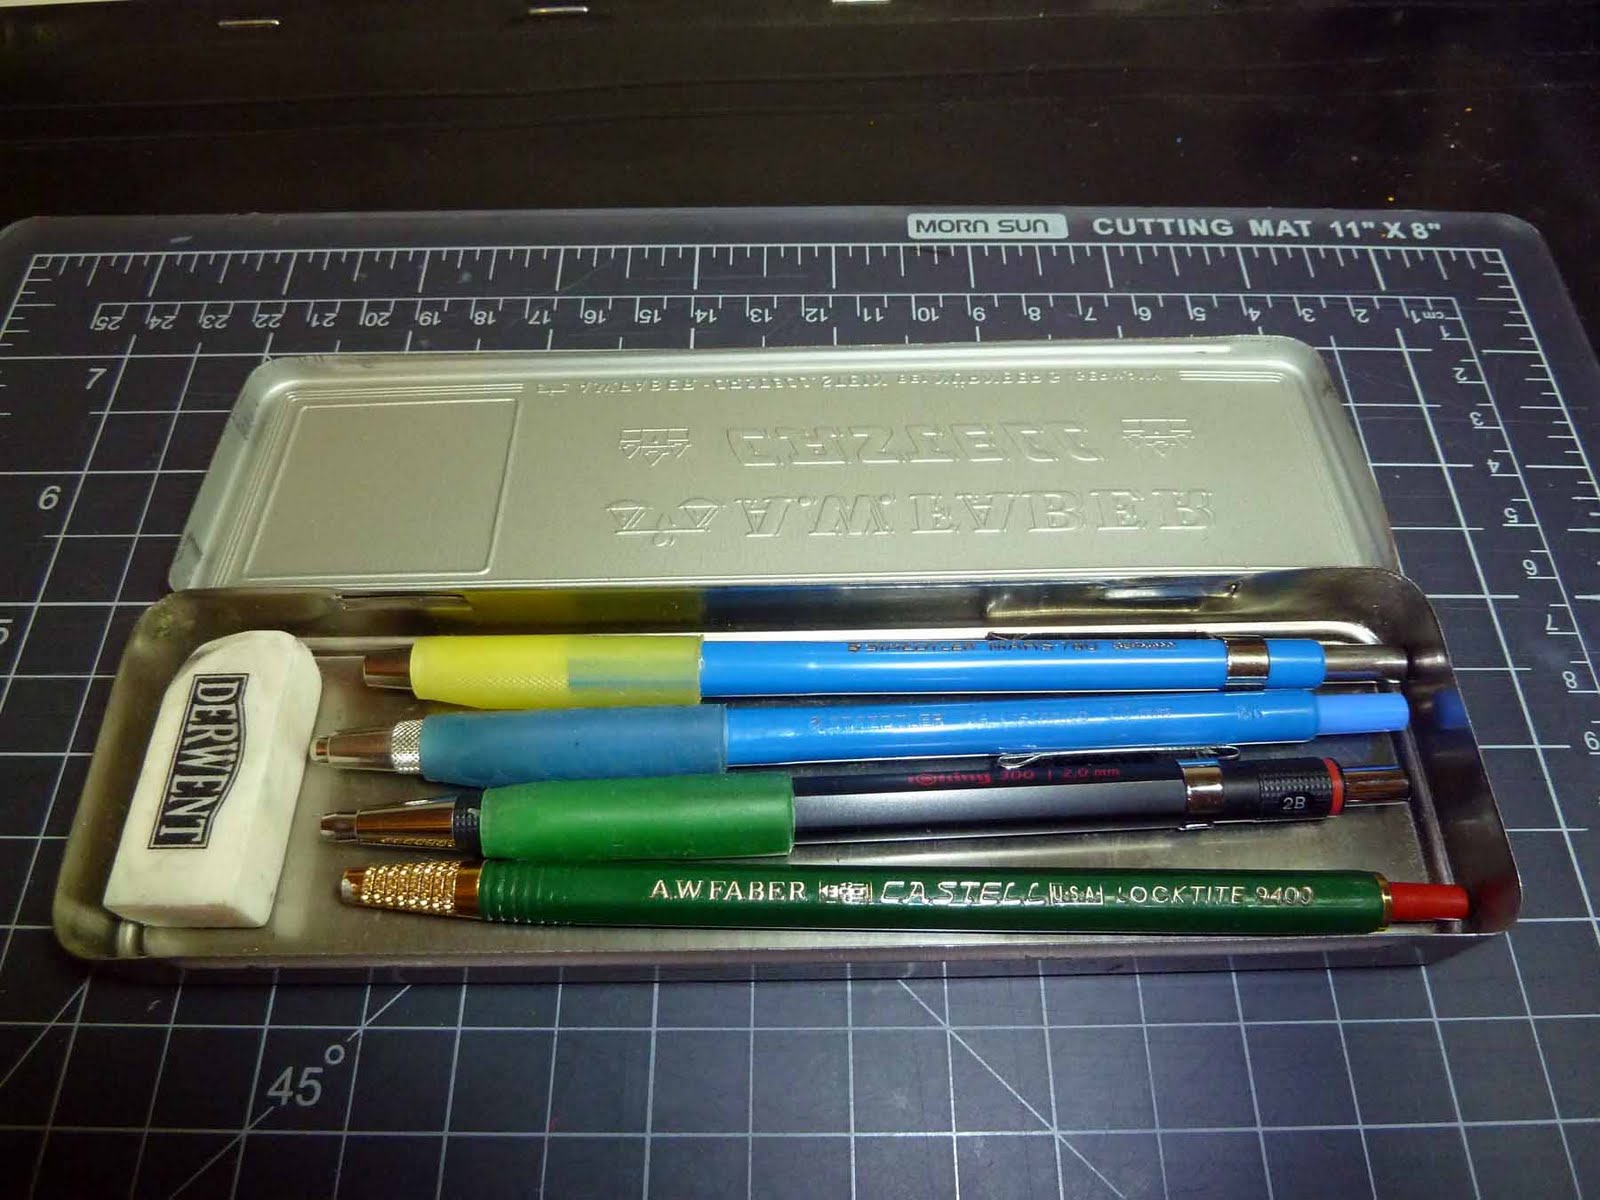 BUY Faber-Castell 9000 Drawing Pencil Bag Set